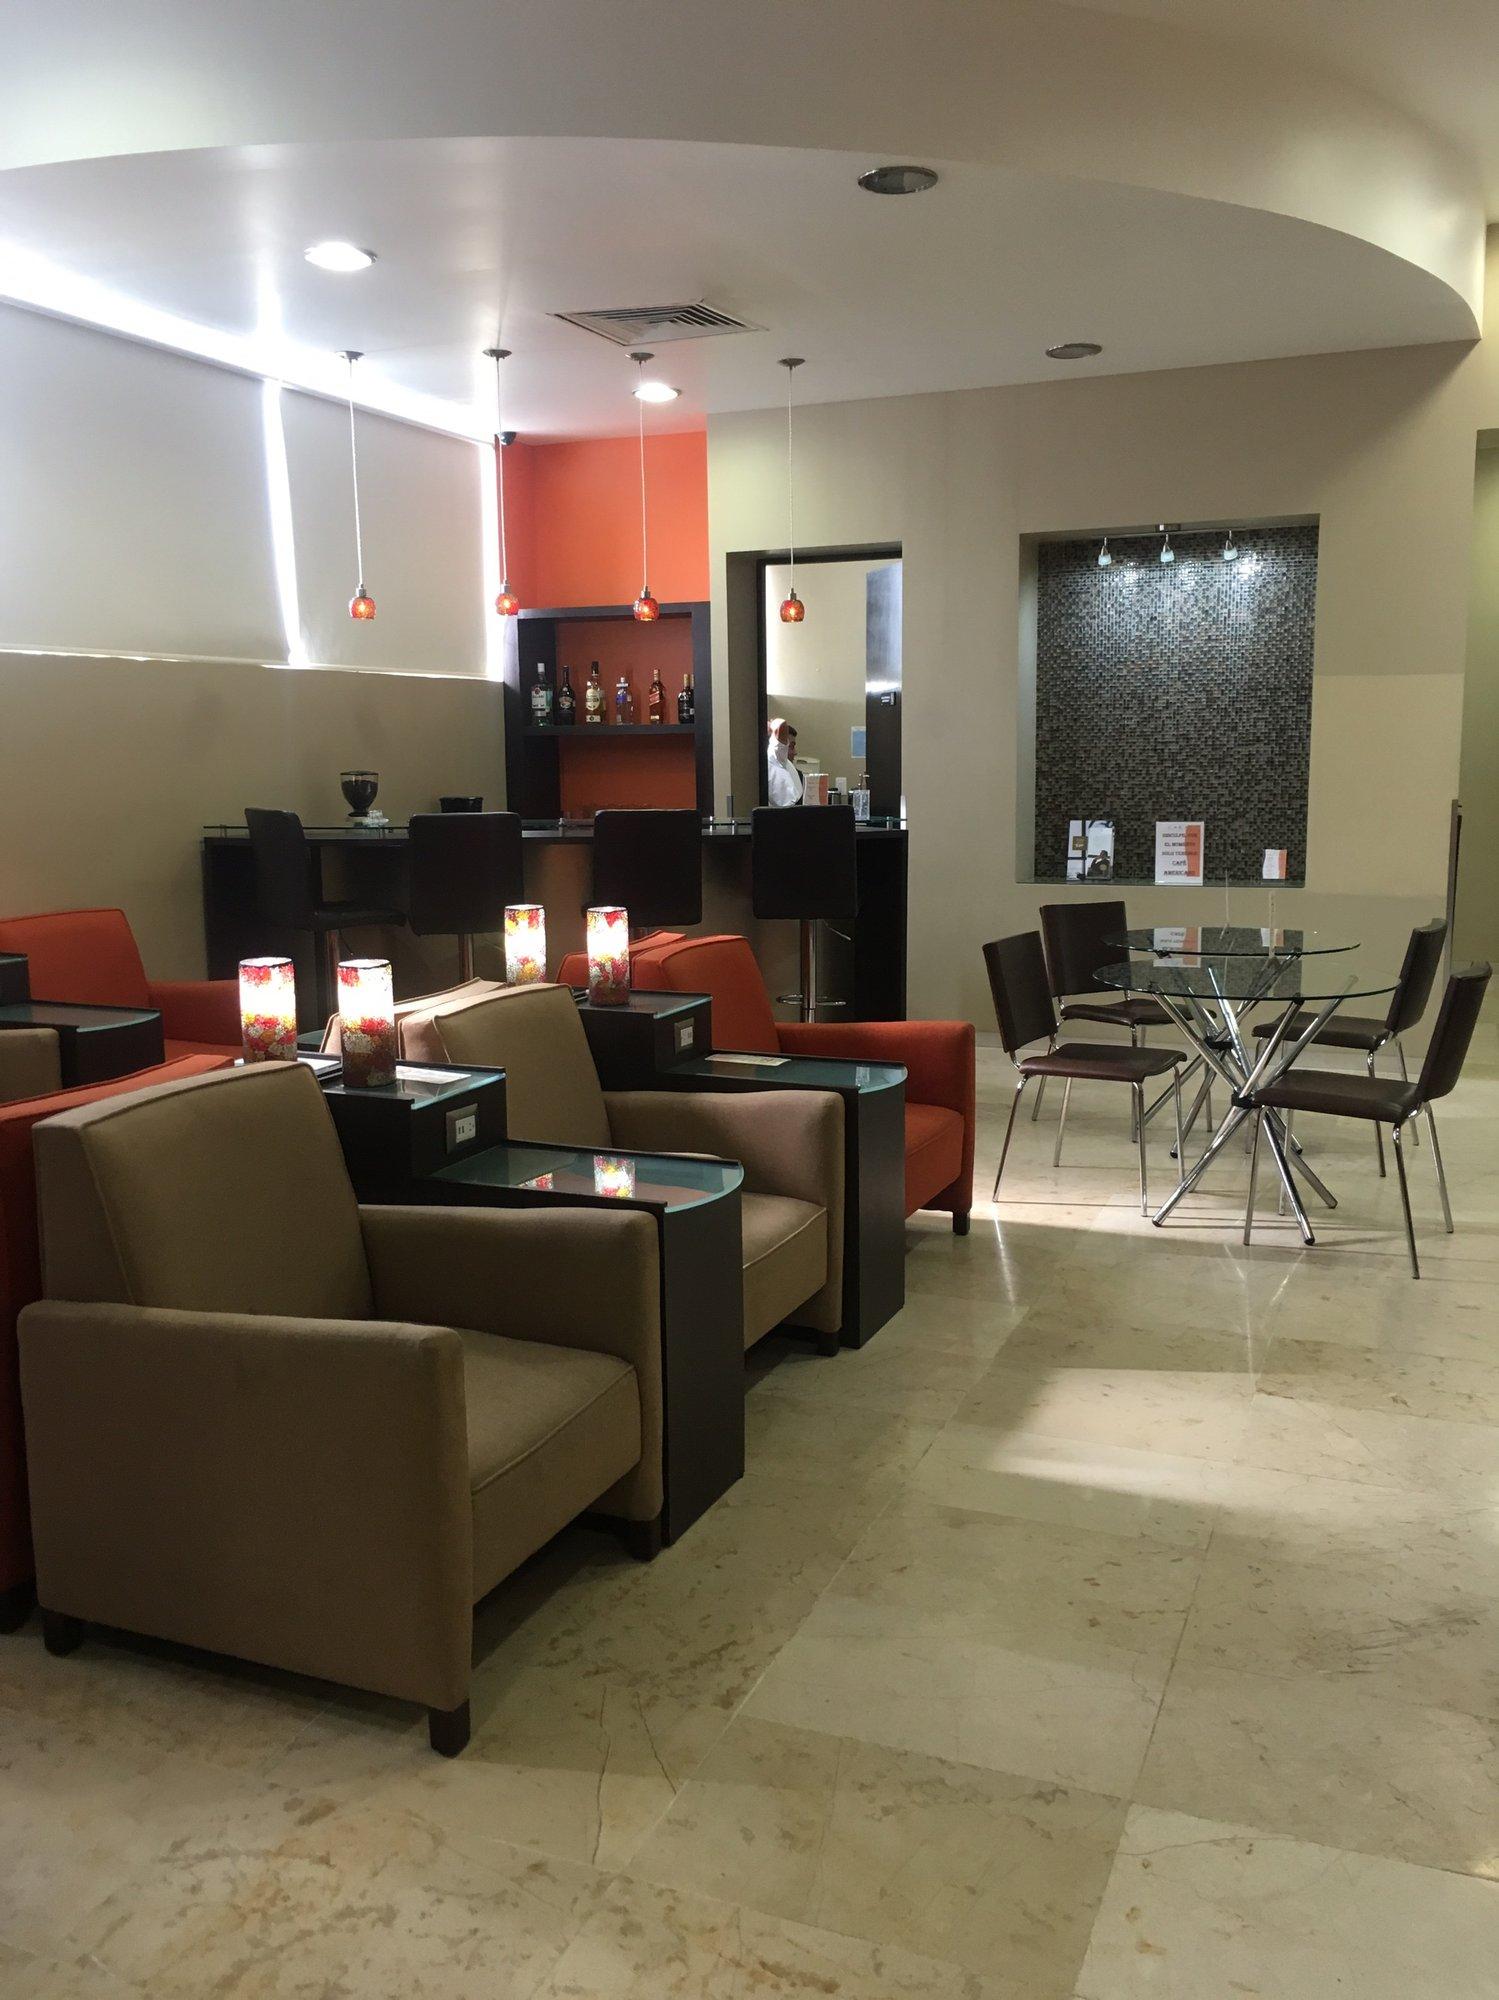 Caral VIP Lounge image 8 of 10